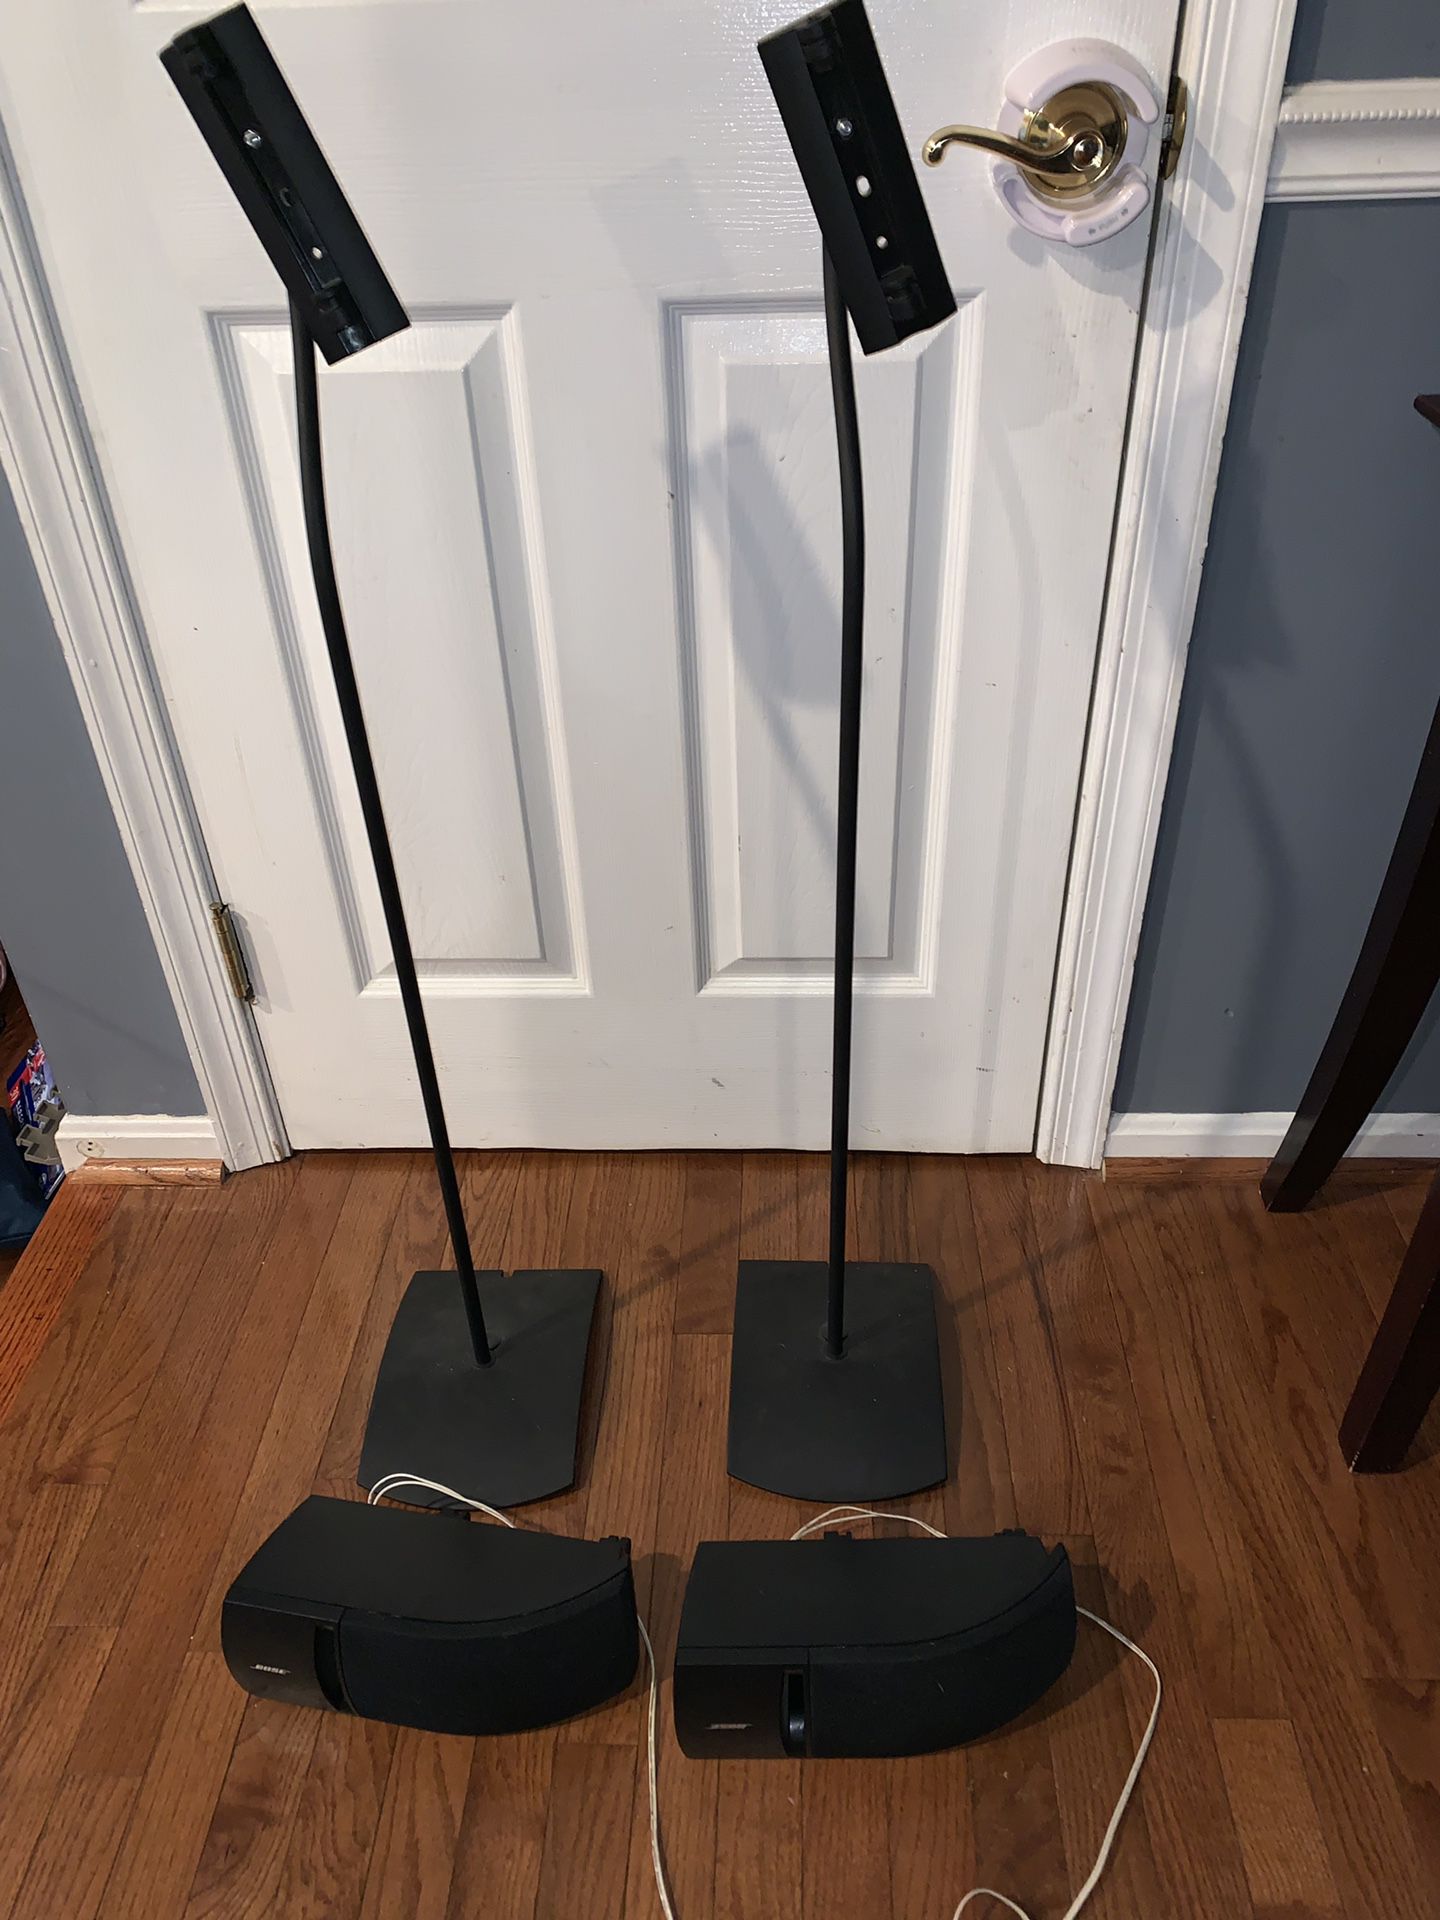 Pair of Bose speakers and stands